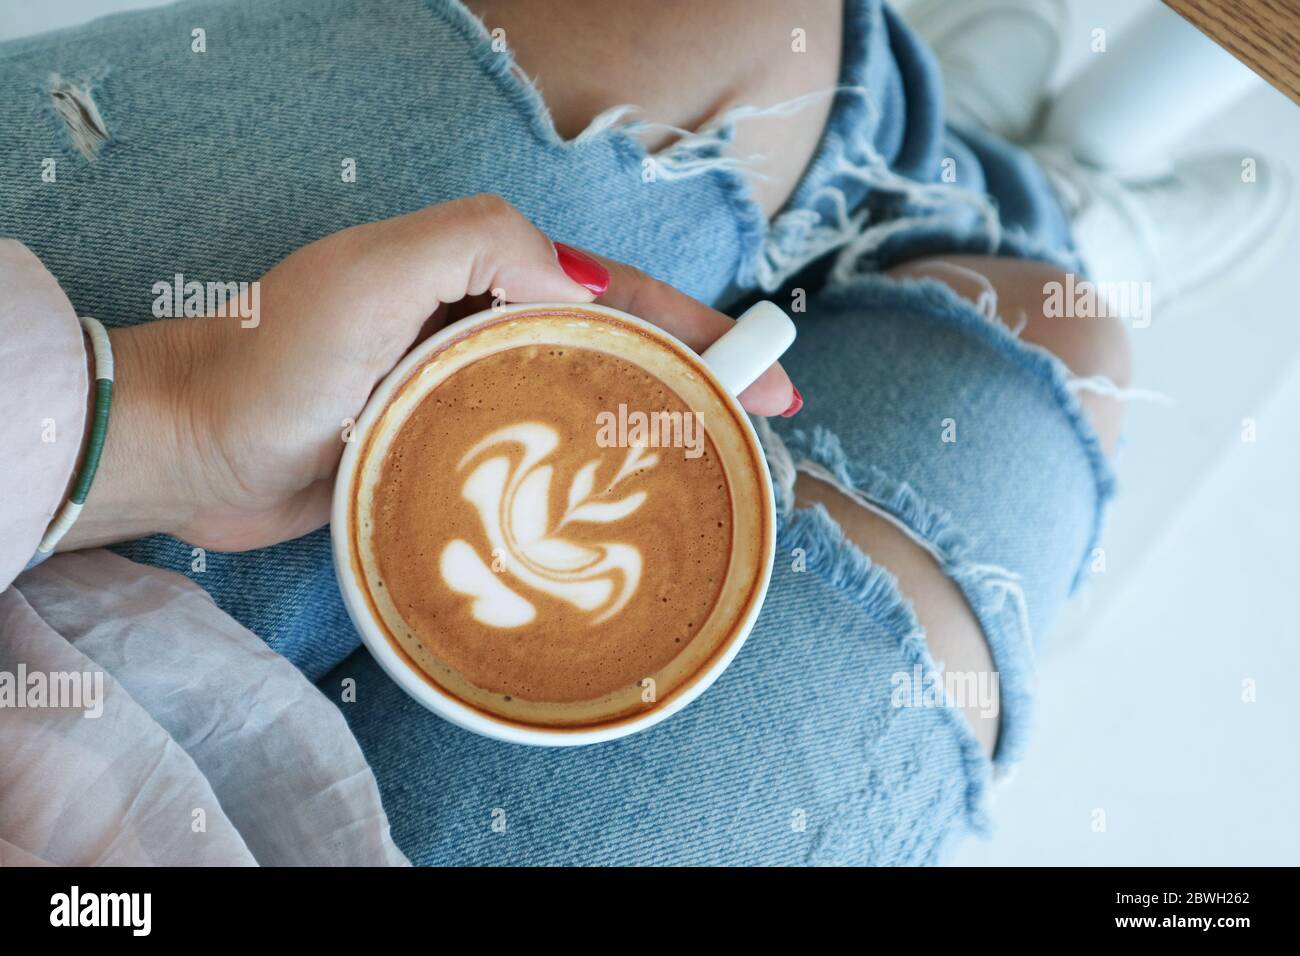 https://c8.alamy.com/comp/2BWH262/female-hand-holds-a-cup-of-cappuccino-on-her-knees-in-a-cafe-top-view-2BWH262.jpg